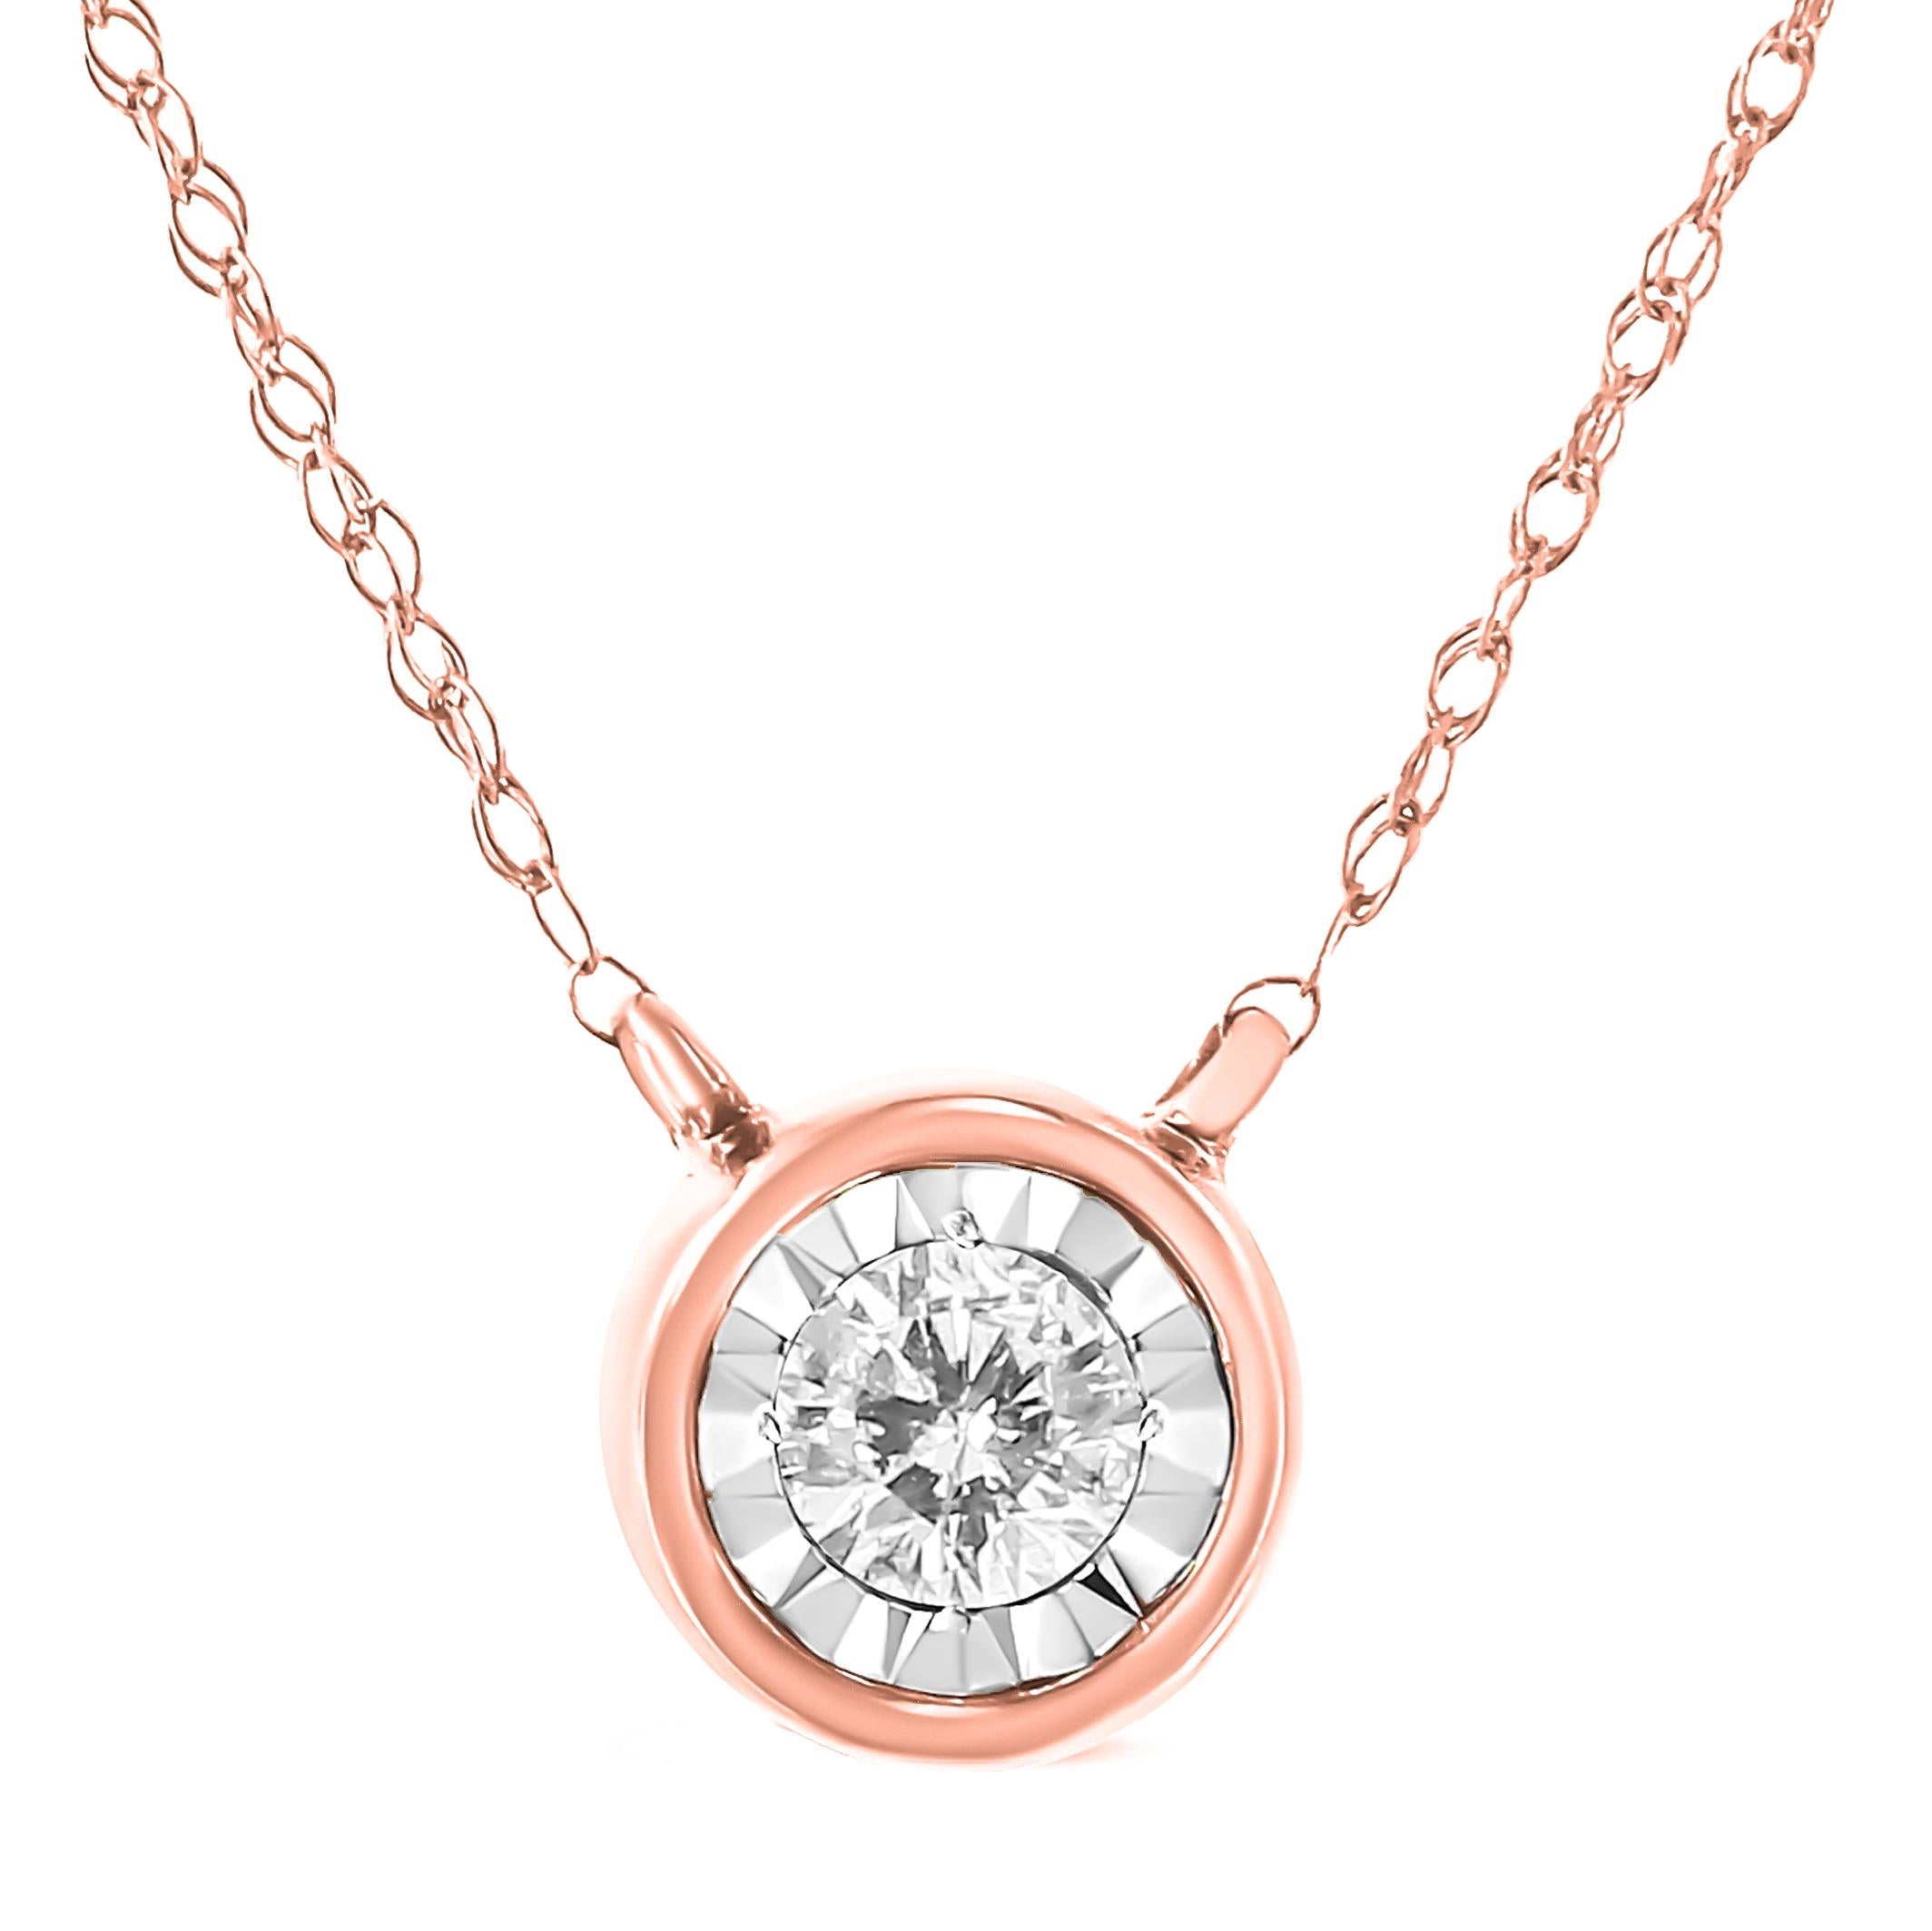 Discover the perfect way to celebrate life's milestones, achievements, and special occasions with this understated yet dazzling diamond necklace. The exquisitely simple design features a 1/5 cttw round brilliant cut diamond in a silver miracle plate